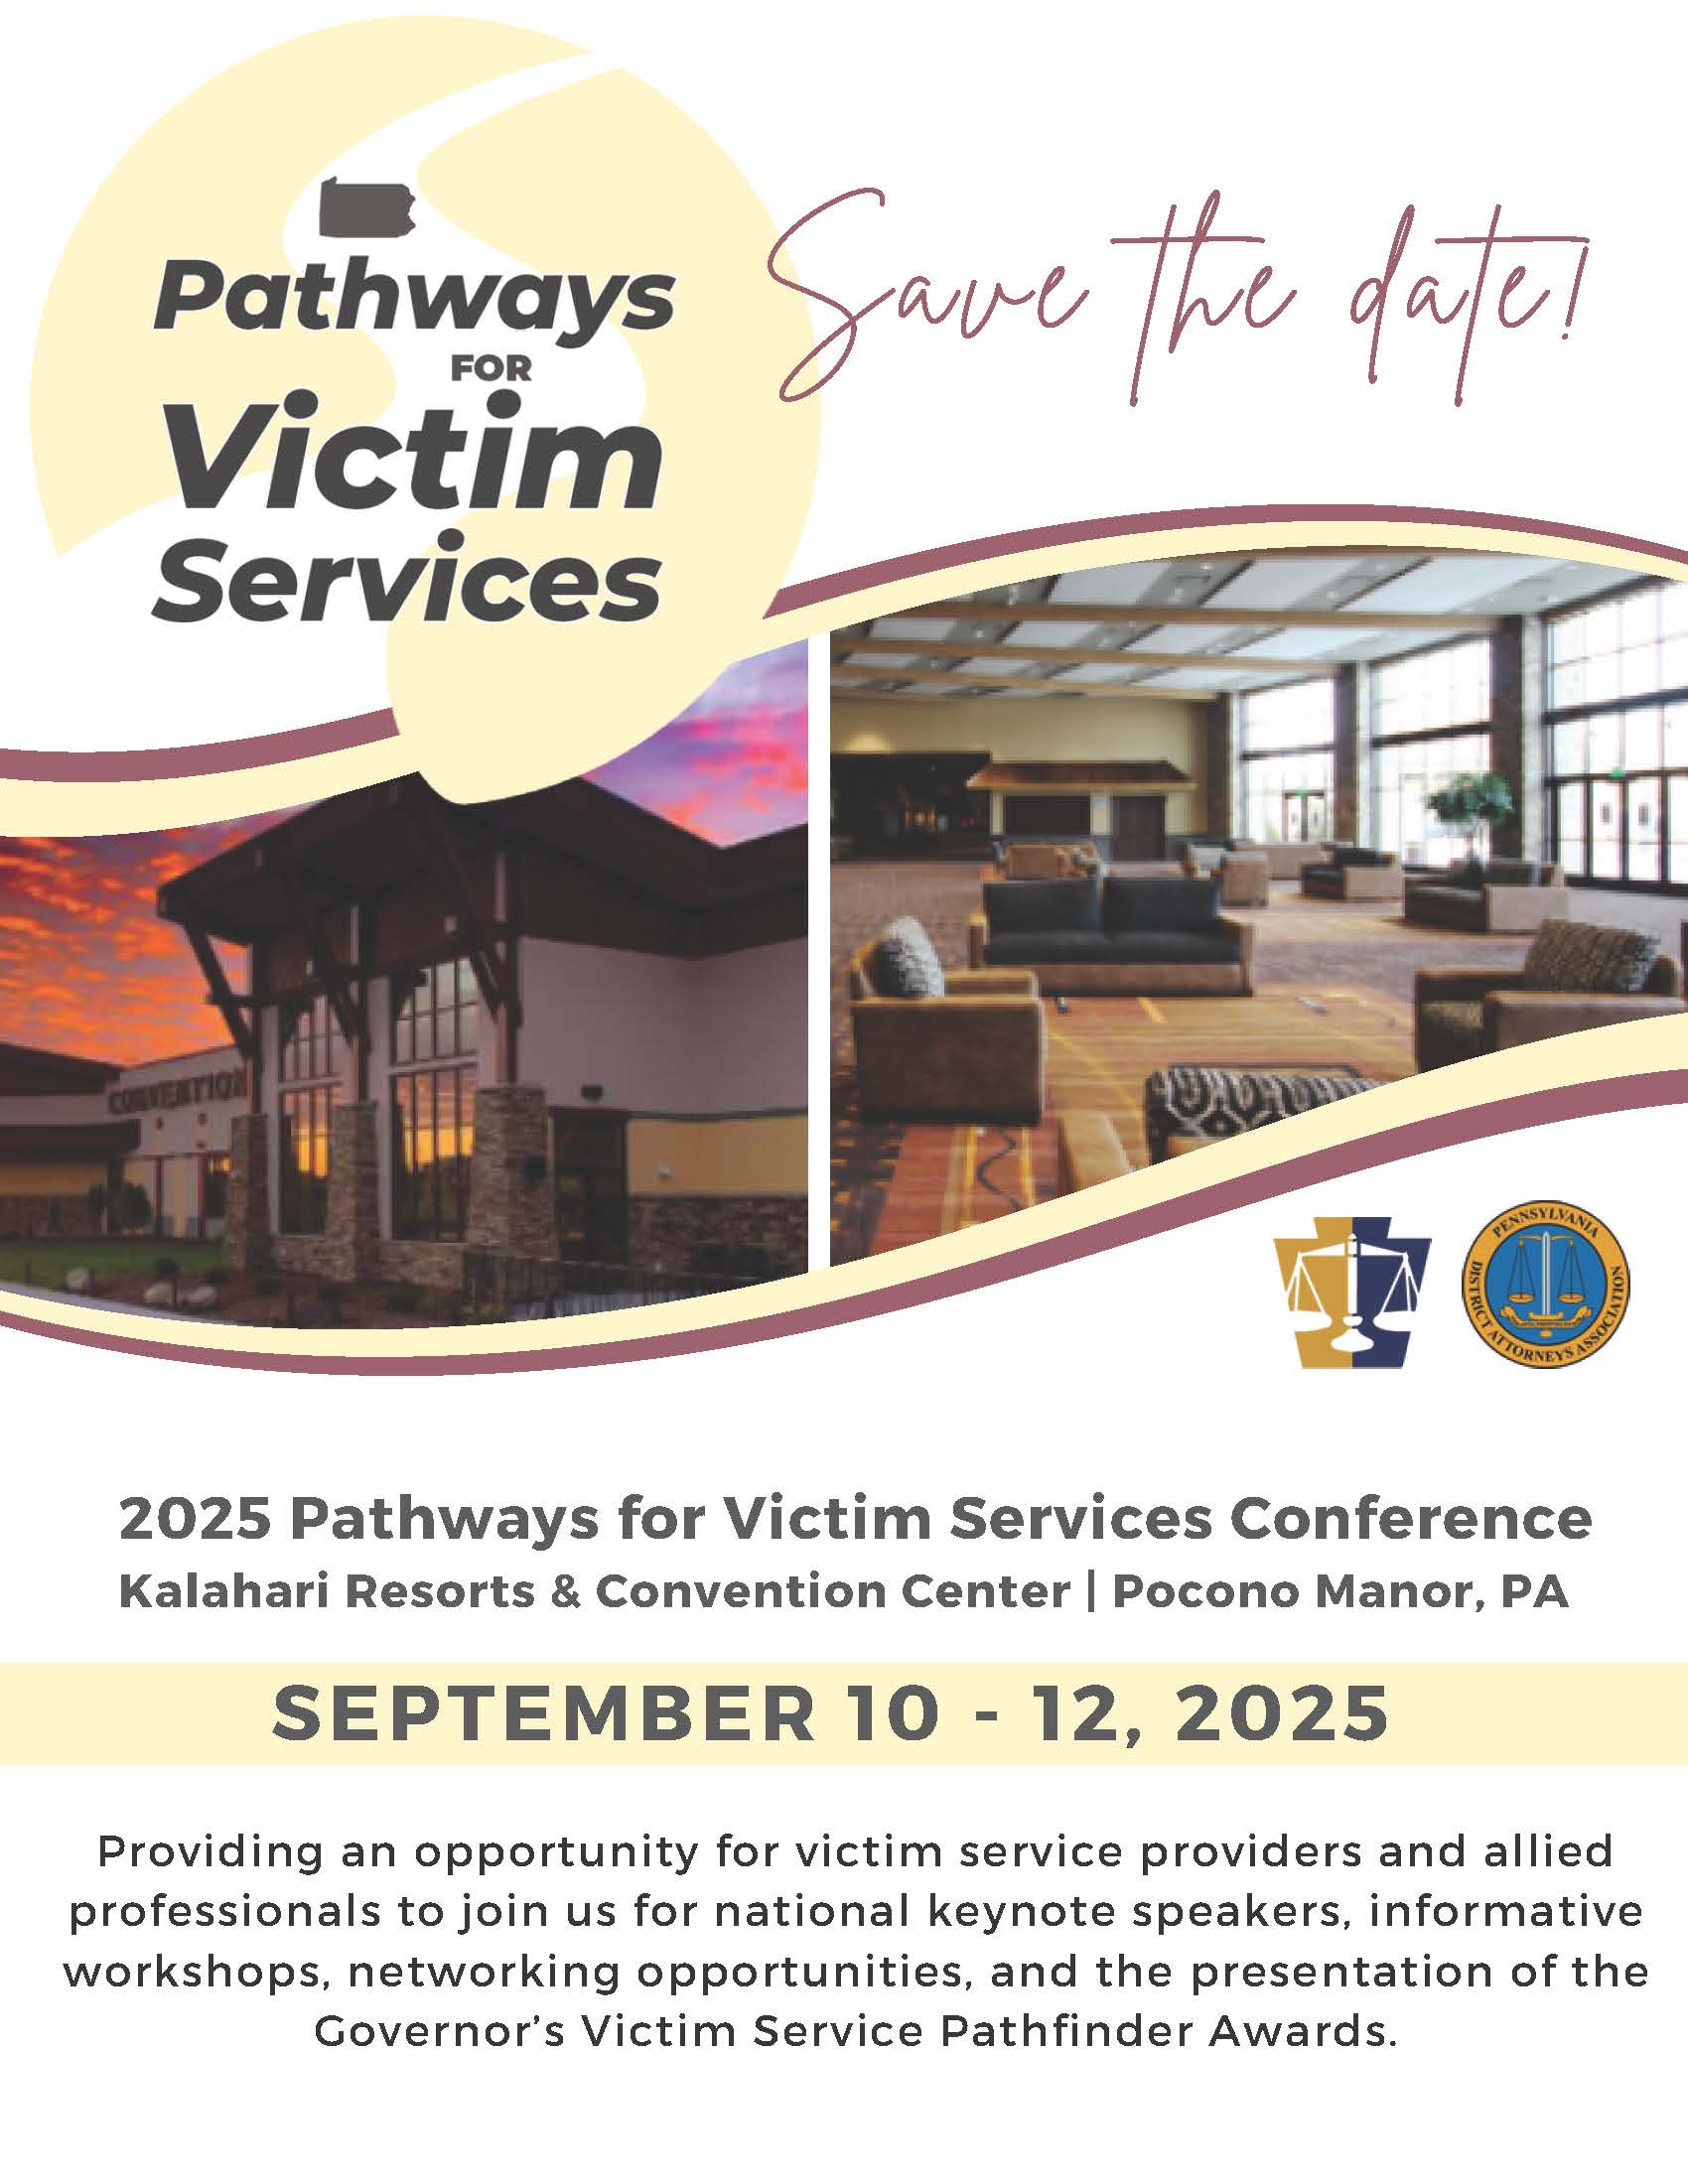 2025 Pathways for Victim Services Save the date Flyer